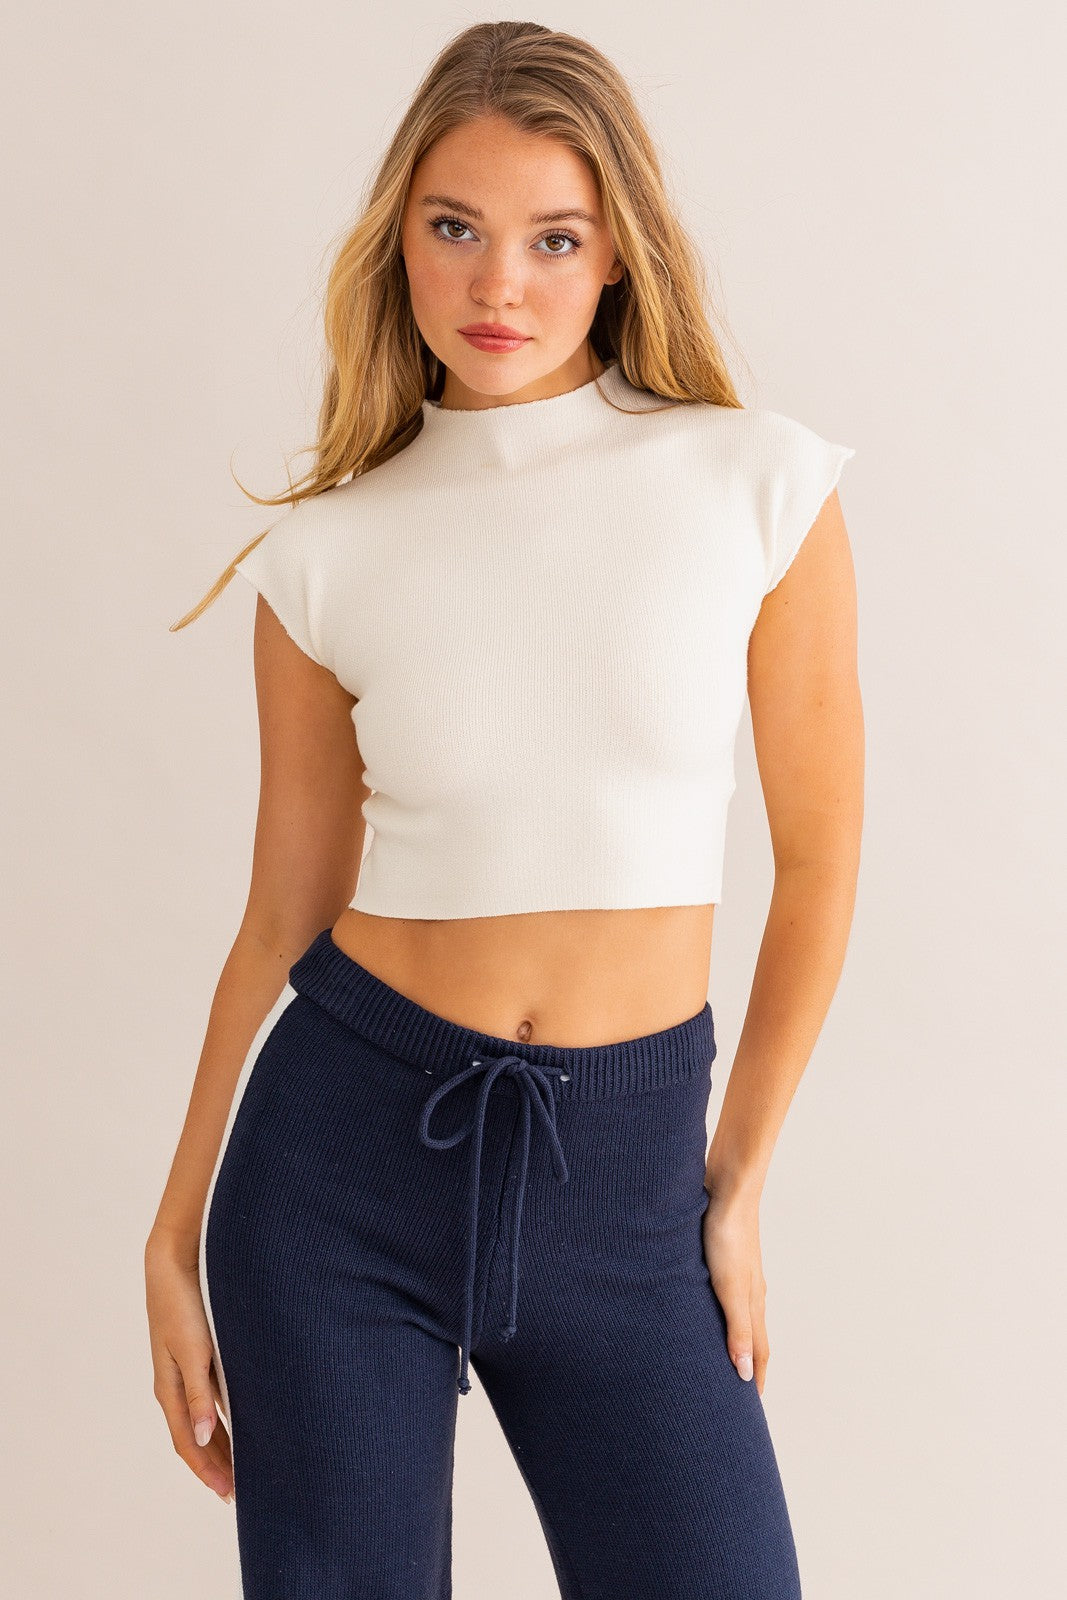 GBO High Neck Sweater Top - White